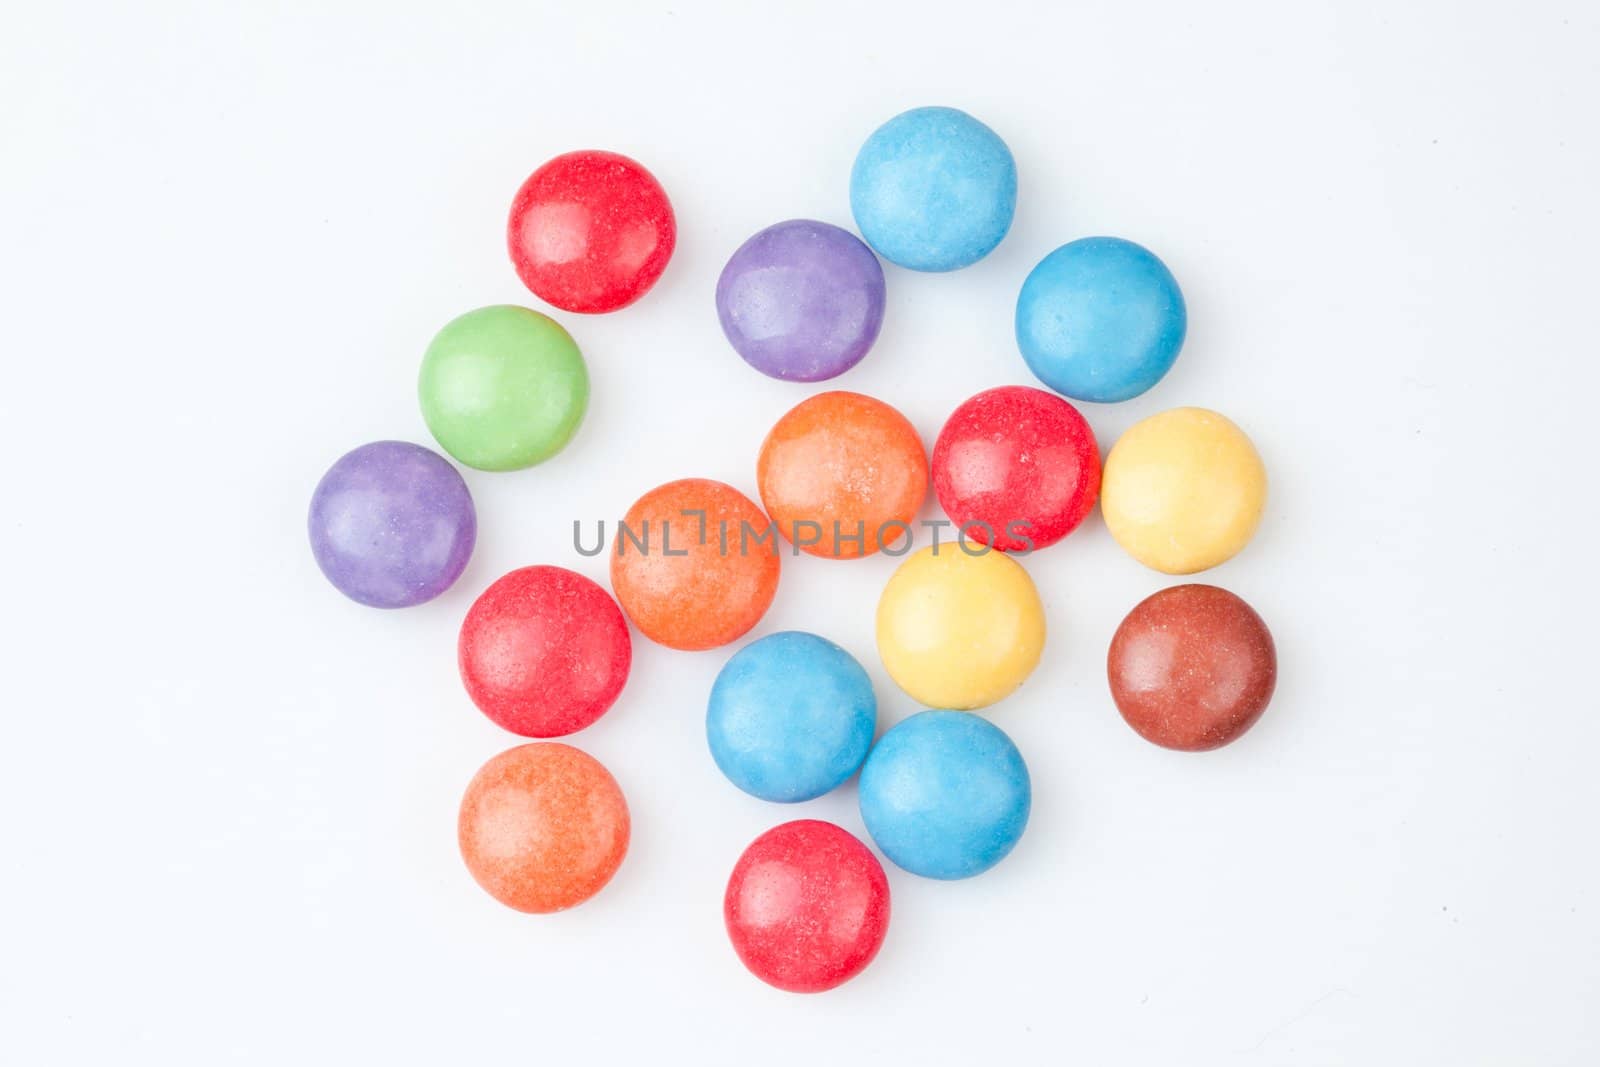 Candies multi coloured against white background